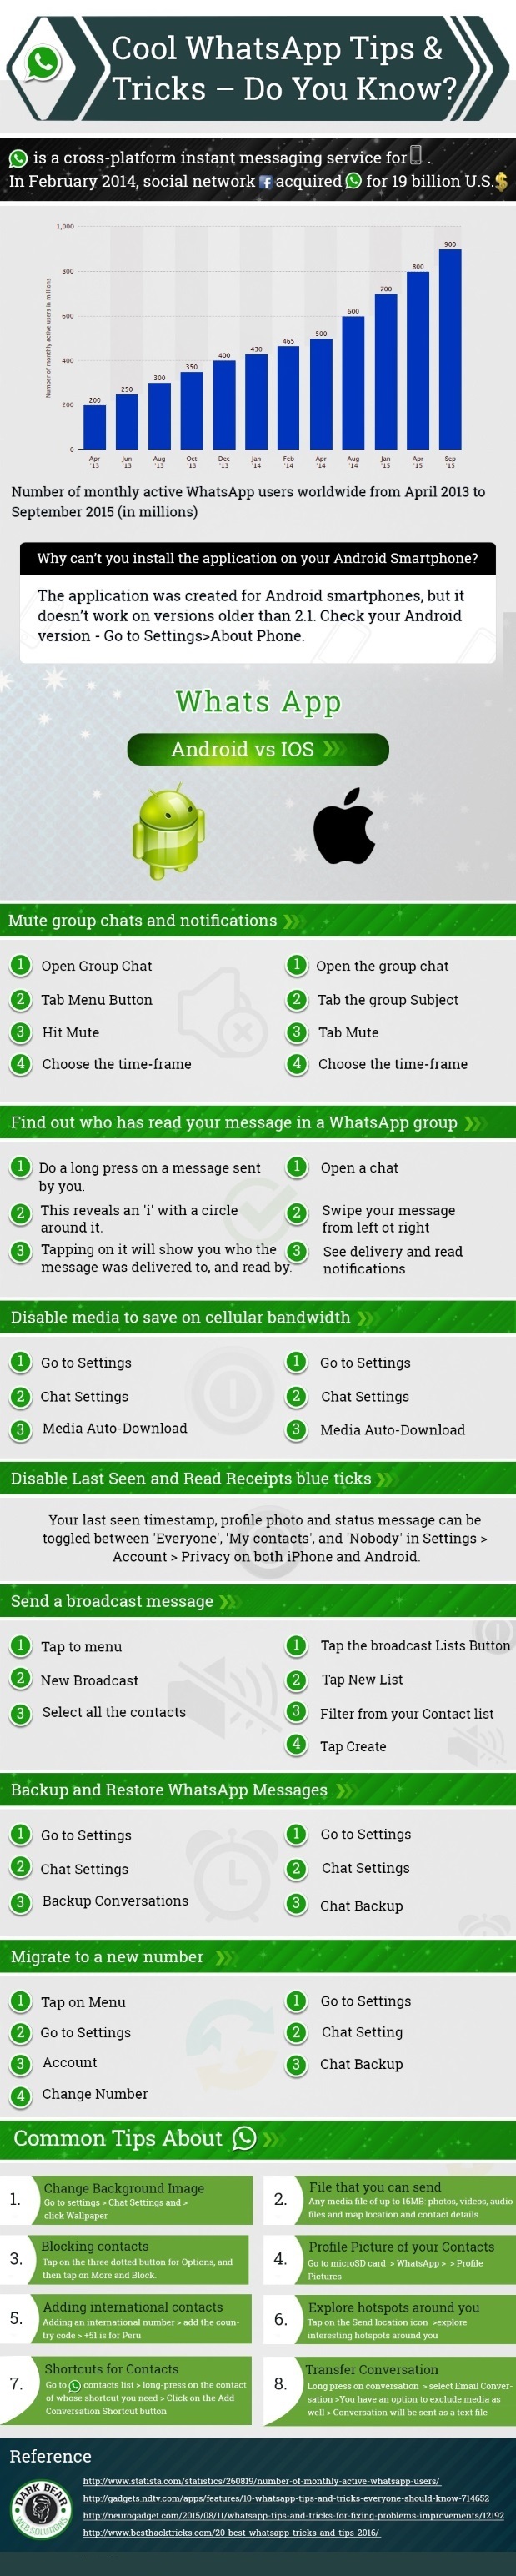 INFOGRAPHIC: WhatsApp tips and tricks 